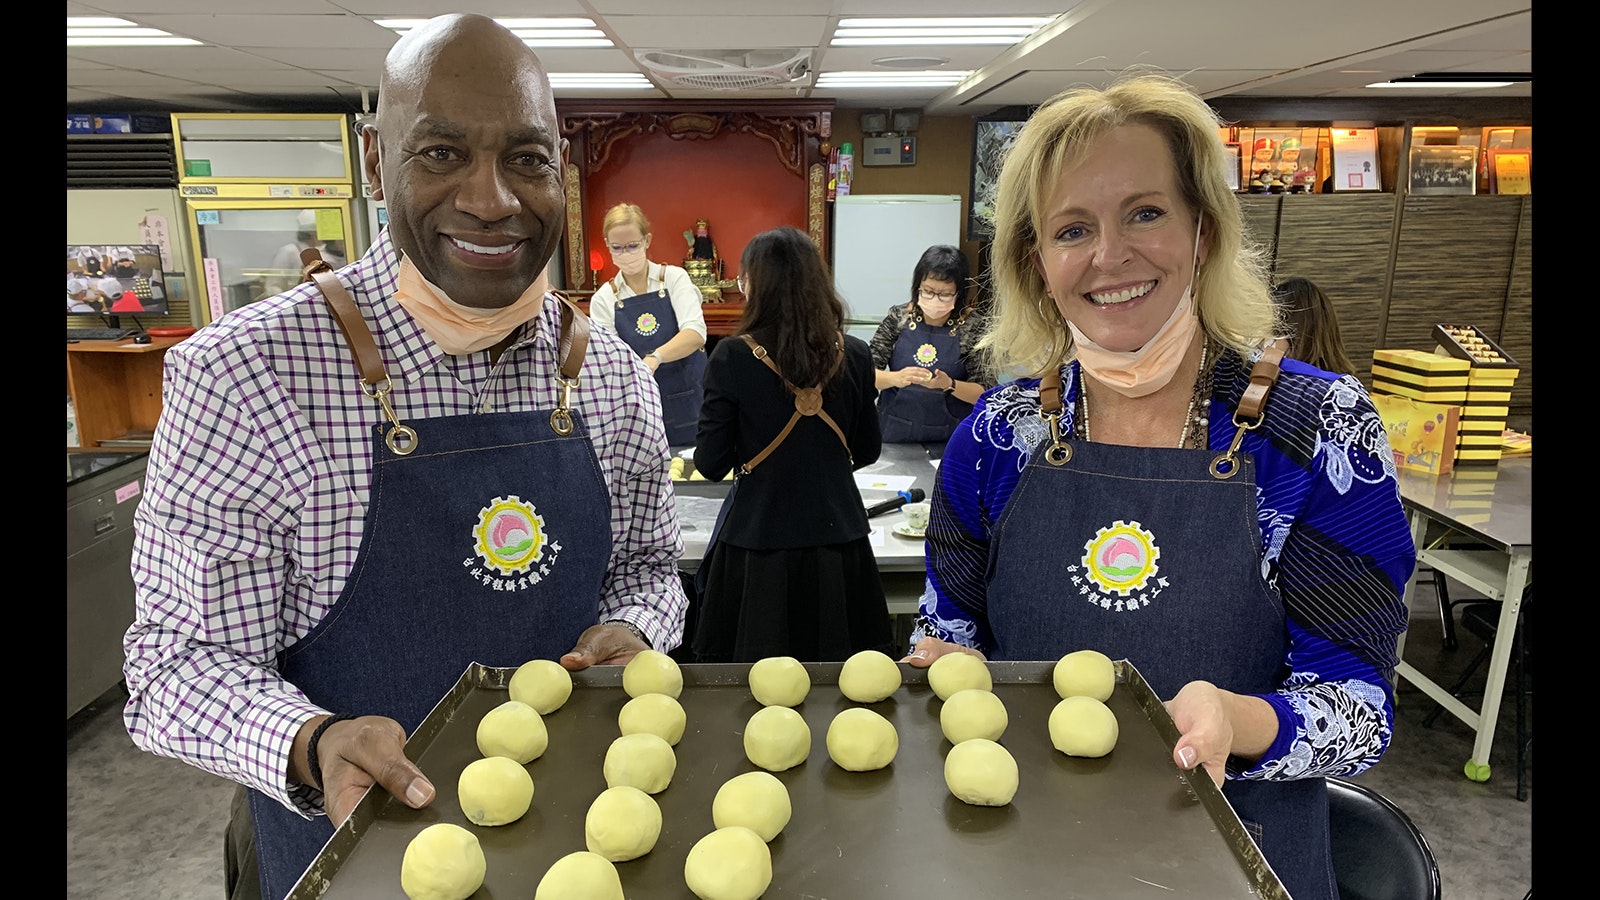 Wyoming Department of Workforce Services Director Robin Sessions Cooley, right, with her Alabama counterpart Fitzgerald Washington during a recent workforce workshop in Taiwan.